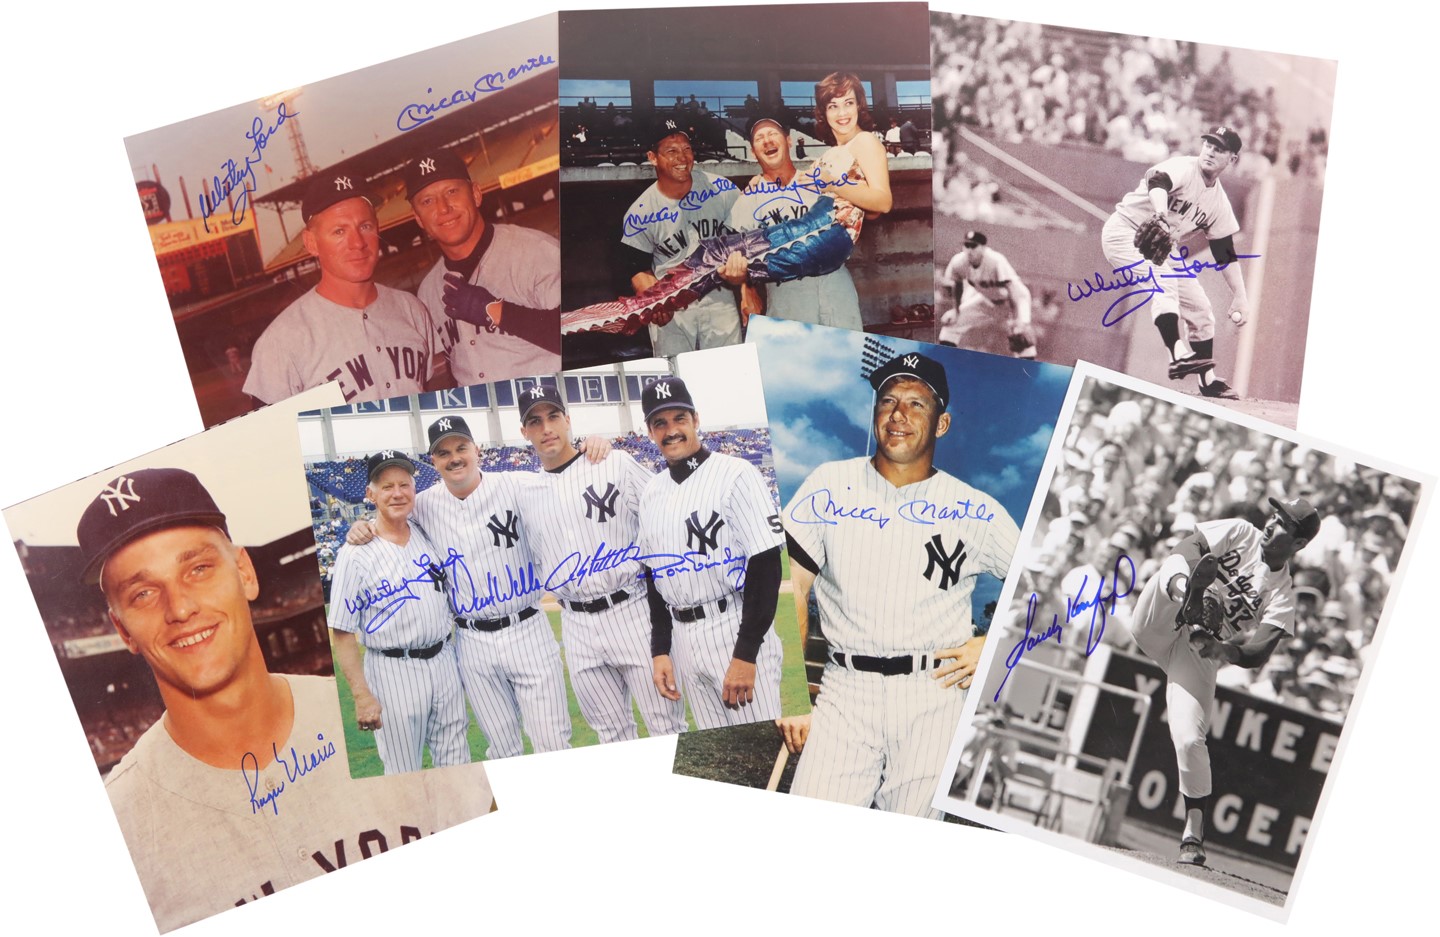 - Signed Photograph Archive w/Mantle & Maris from The Whitey Ford Collection (32)